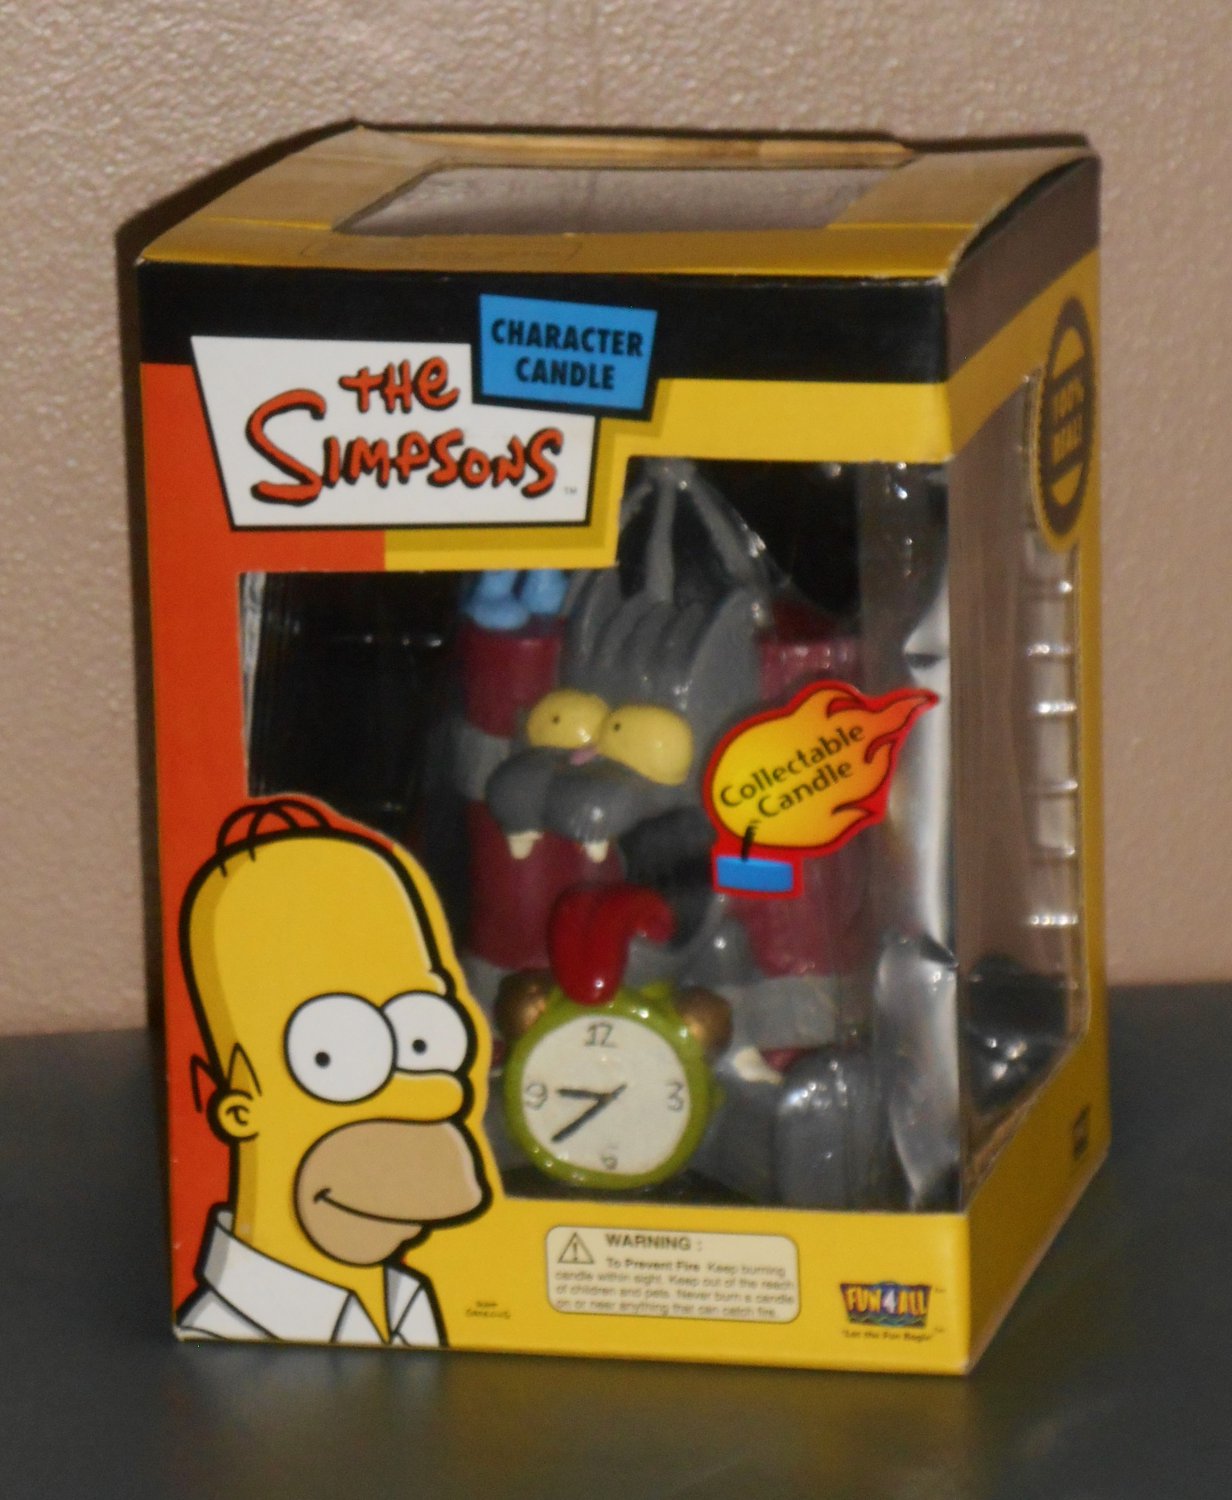 The Simpsons Itchy & Scratchy Character Candle 2003 Fun-4-All 30730 NIB New in Box